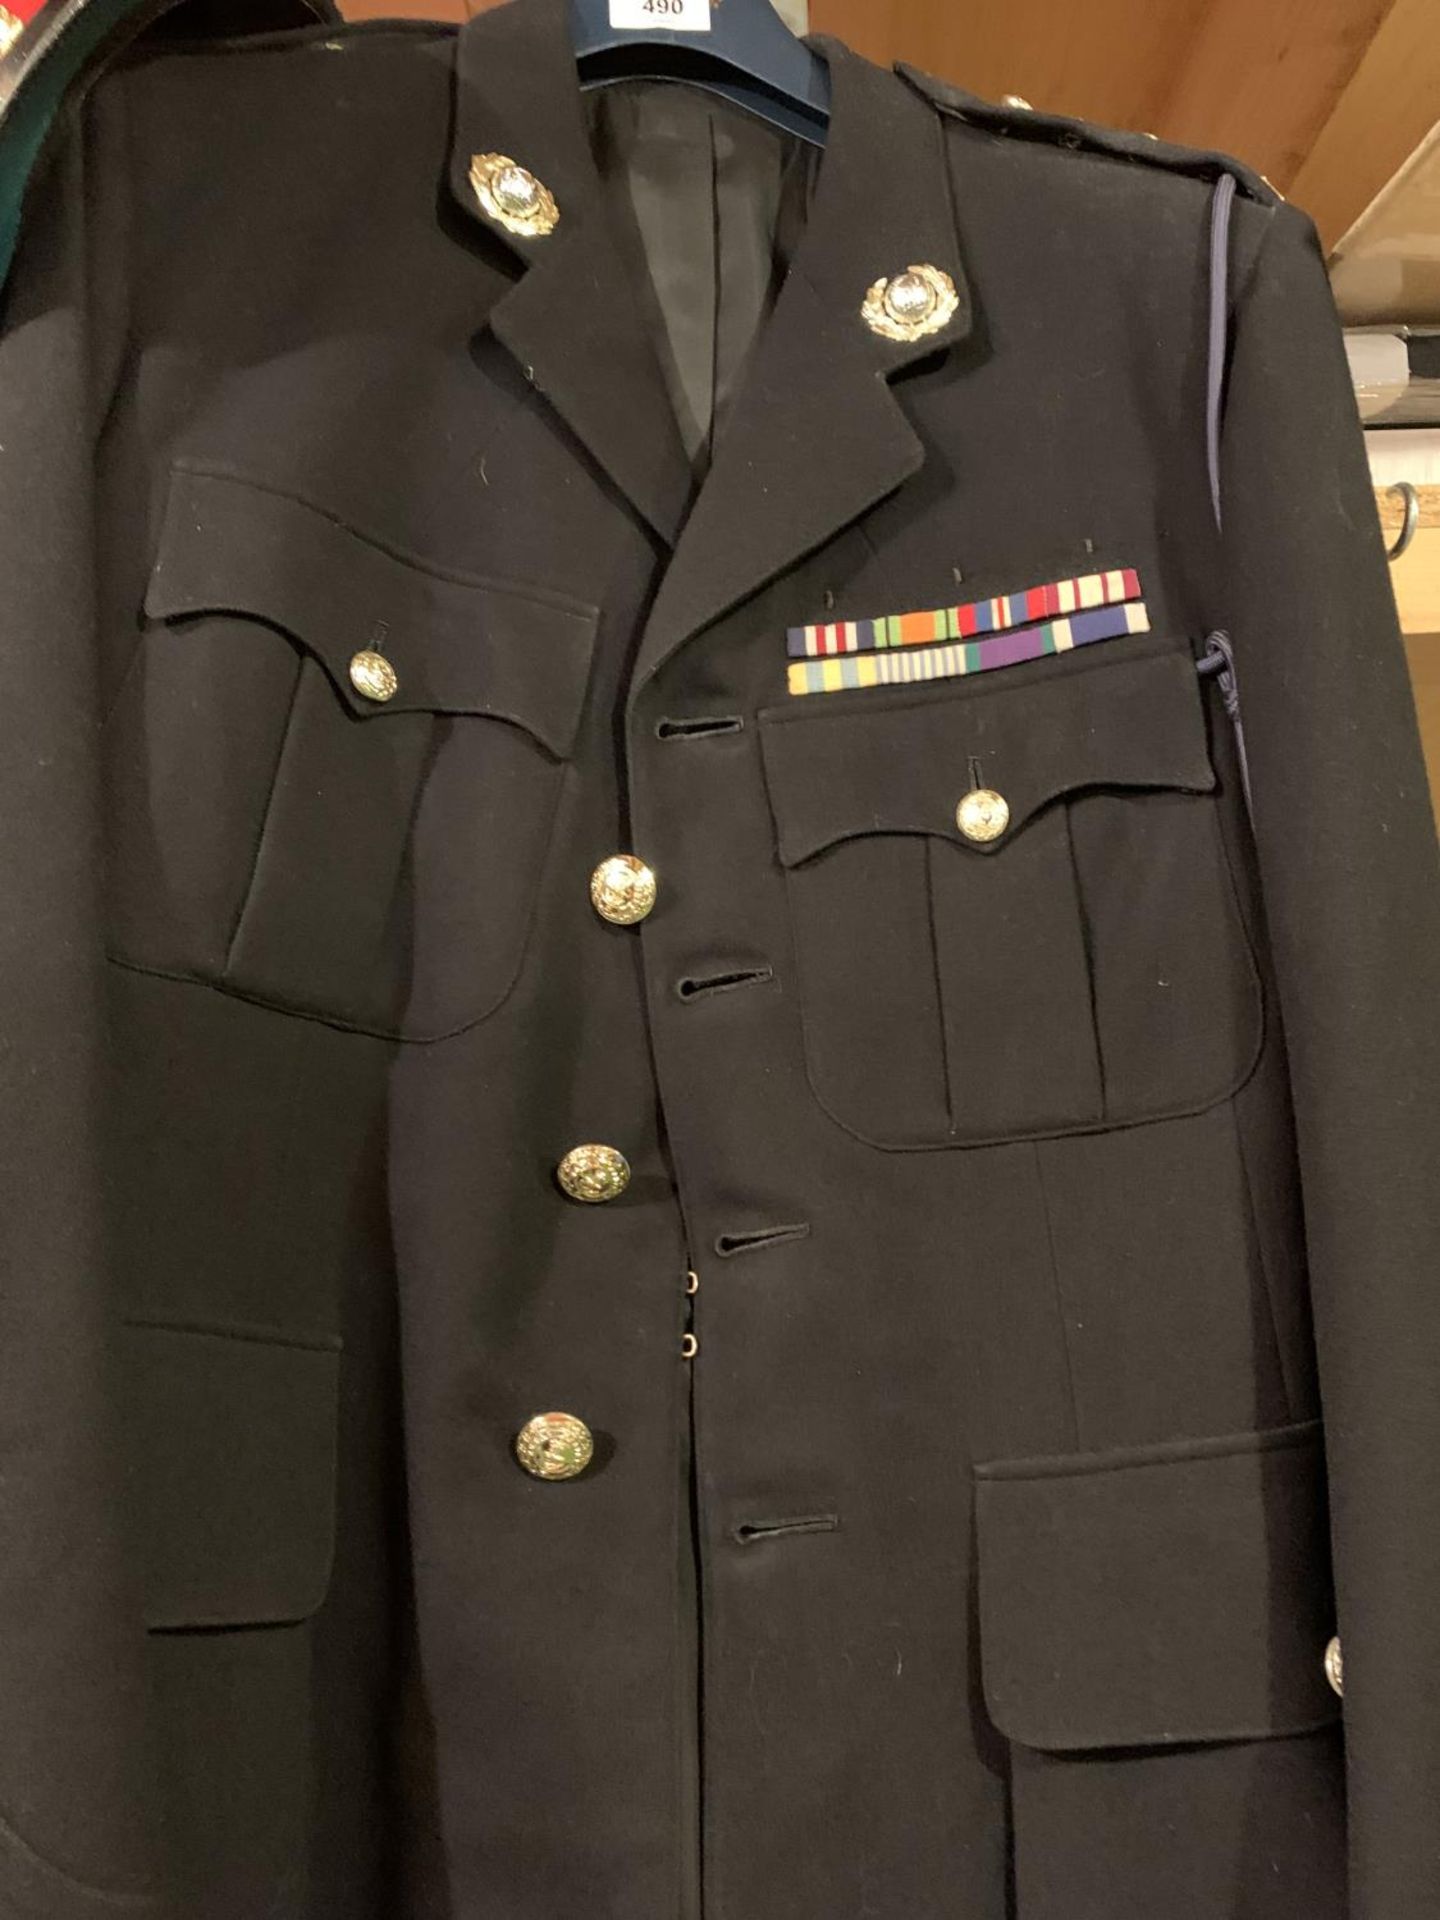 A ROYAL MARINES NO.1 DRESS UNIFORM COMPRISING JACKET, TROUSERS AND HAT - Image 2 of 4